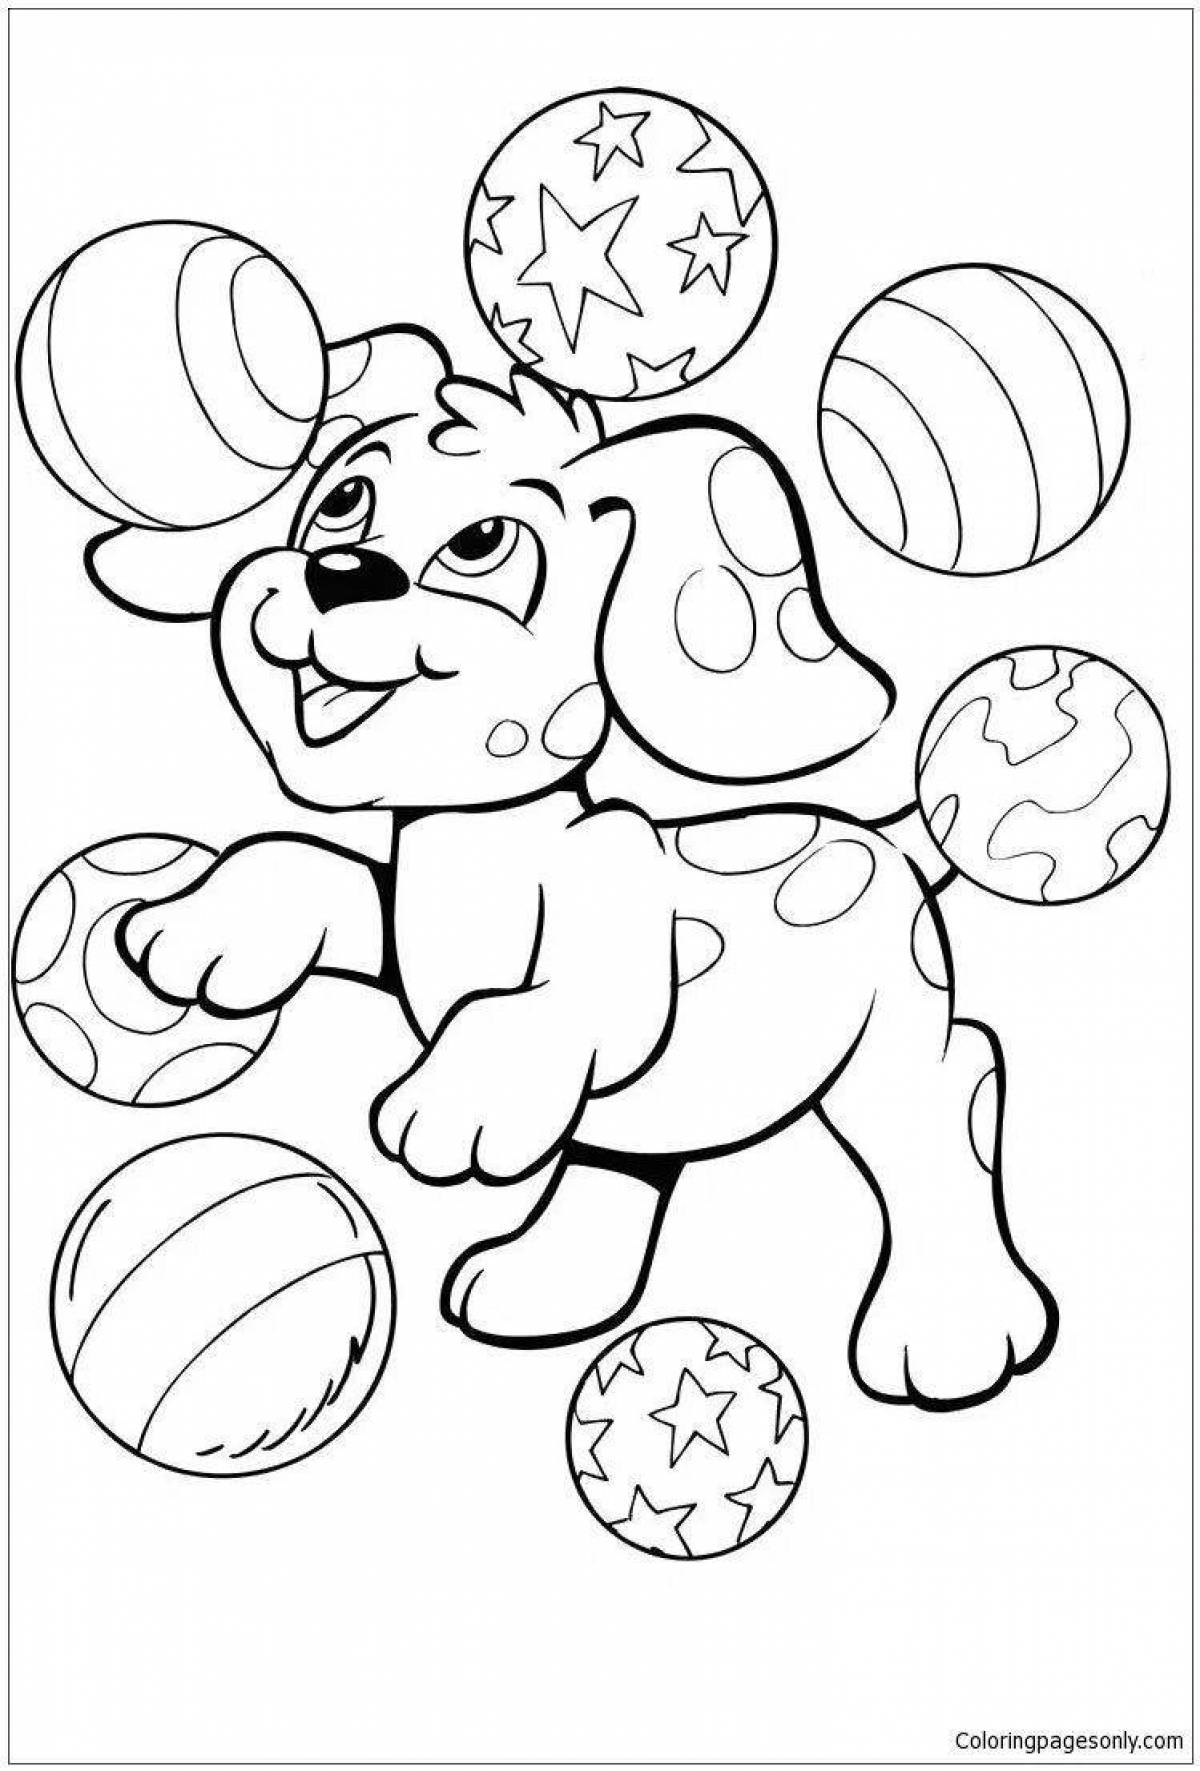 Adorable toys for dogs coloring book